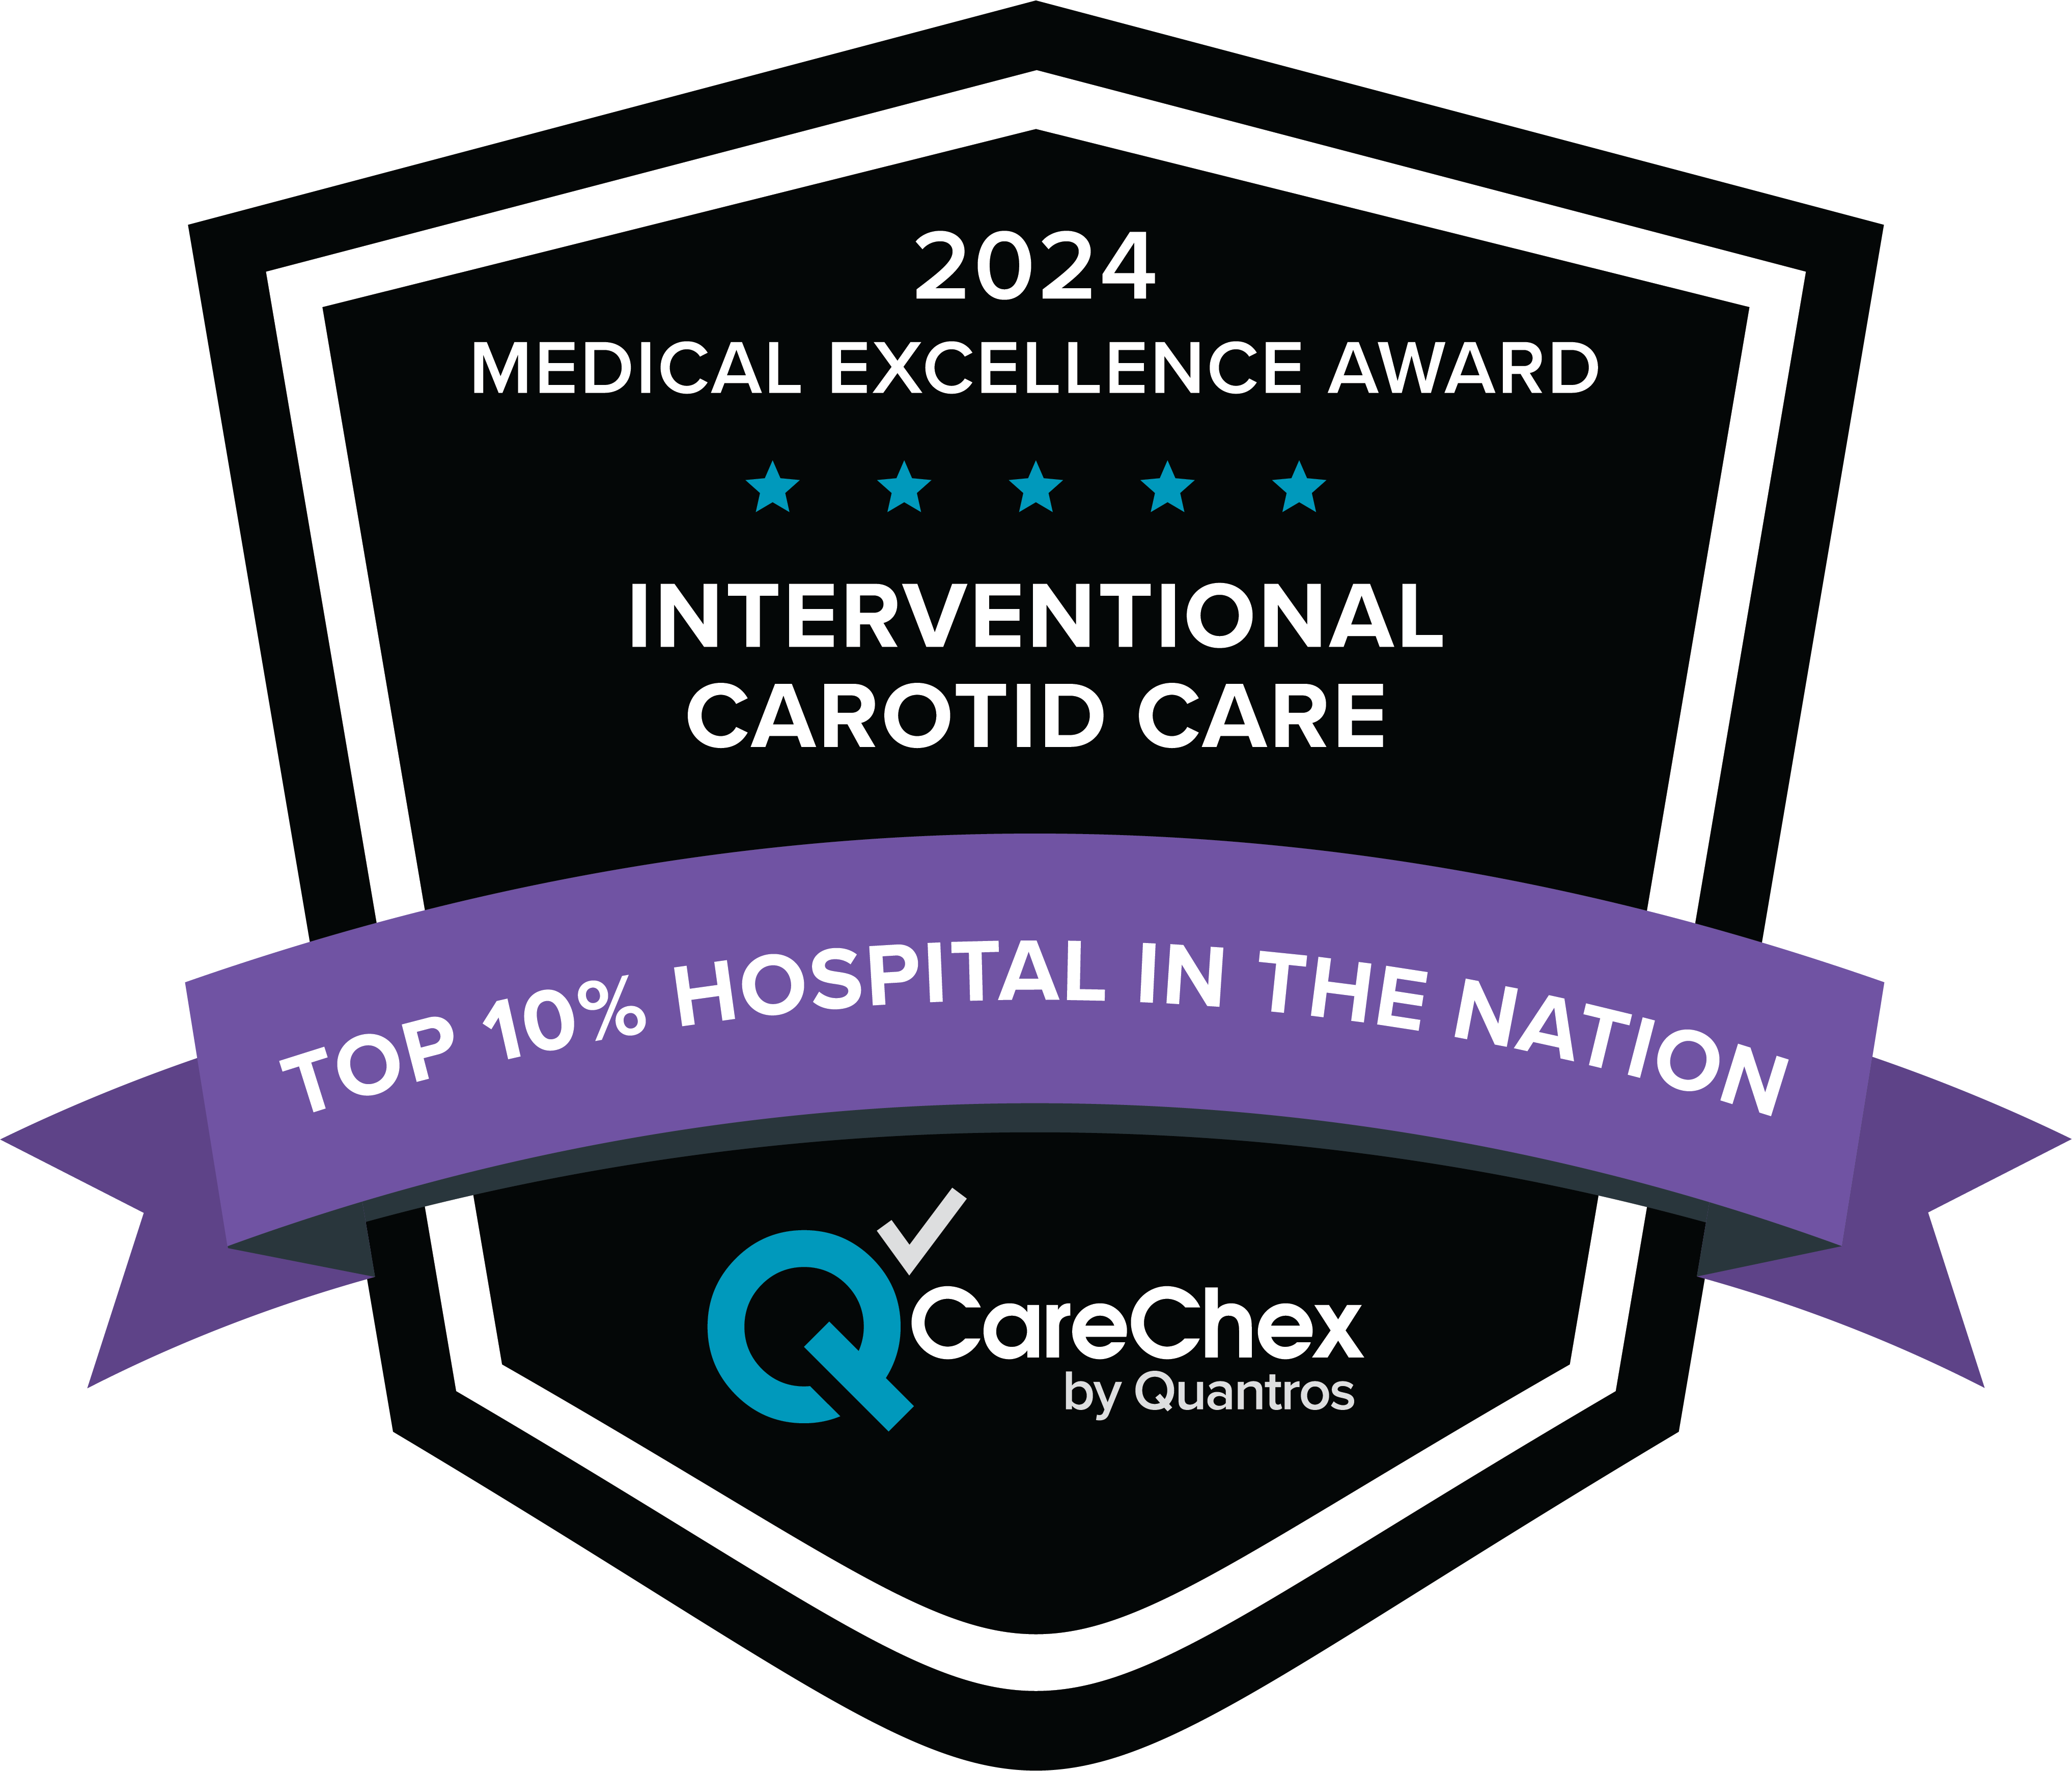 Awards badge for Top 10% Hospital in the Nation for Medical Excellence in Interventional Carotid Care – 2024 CareChex by Quantros